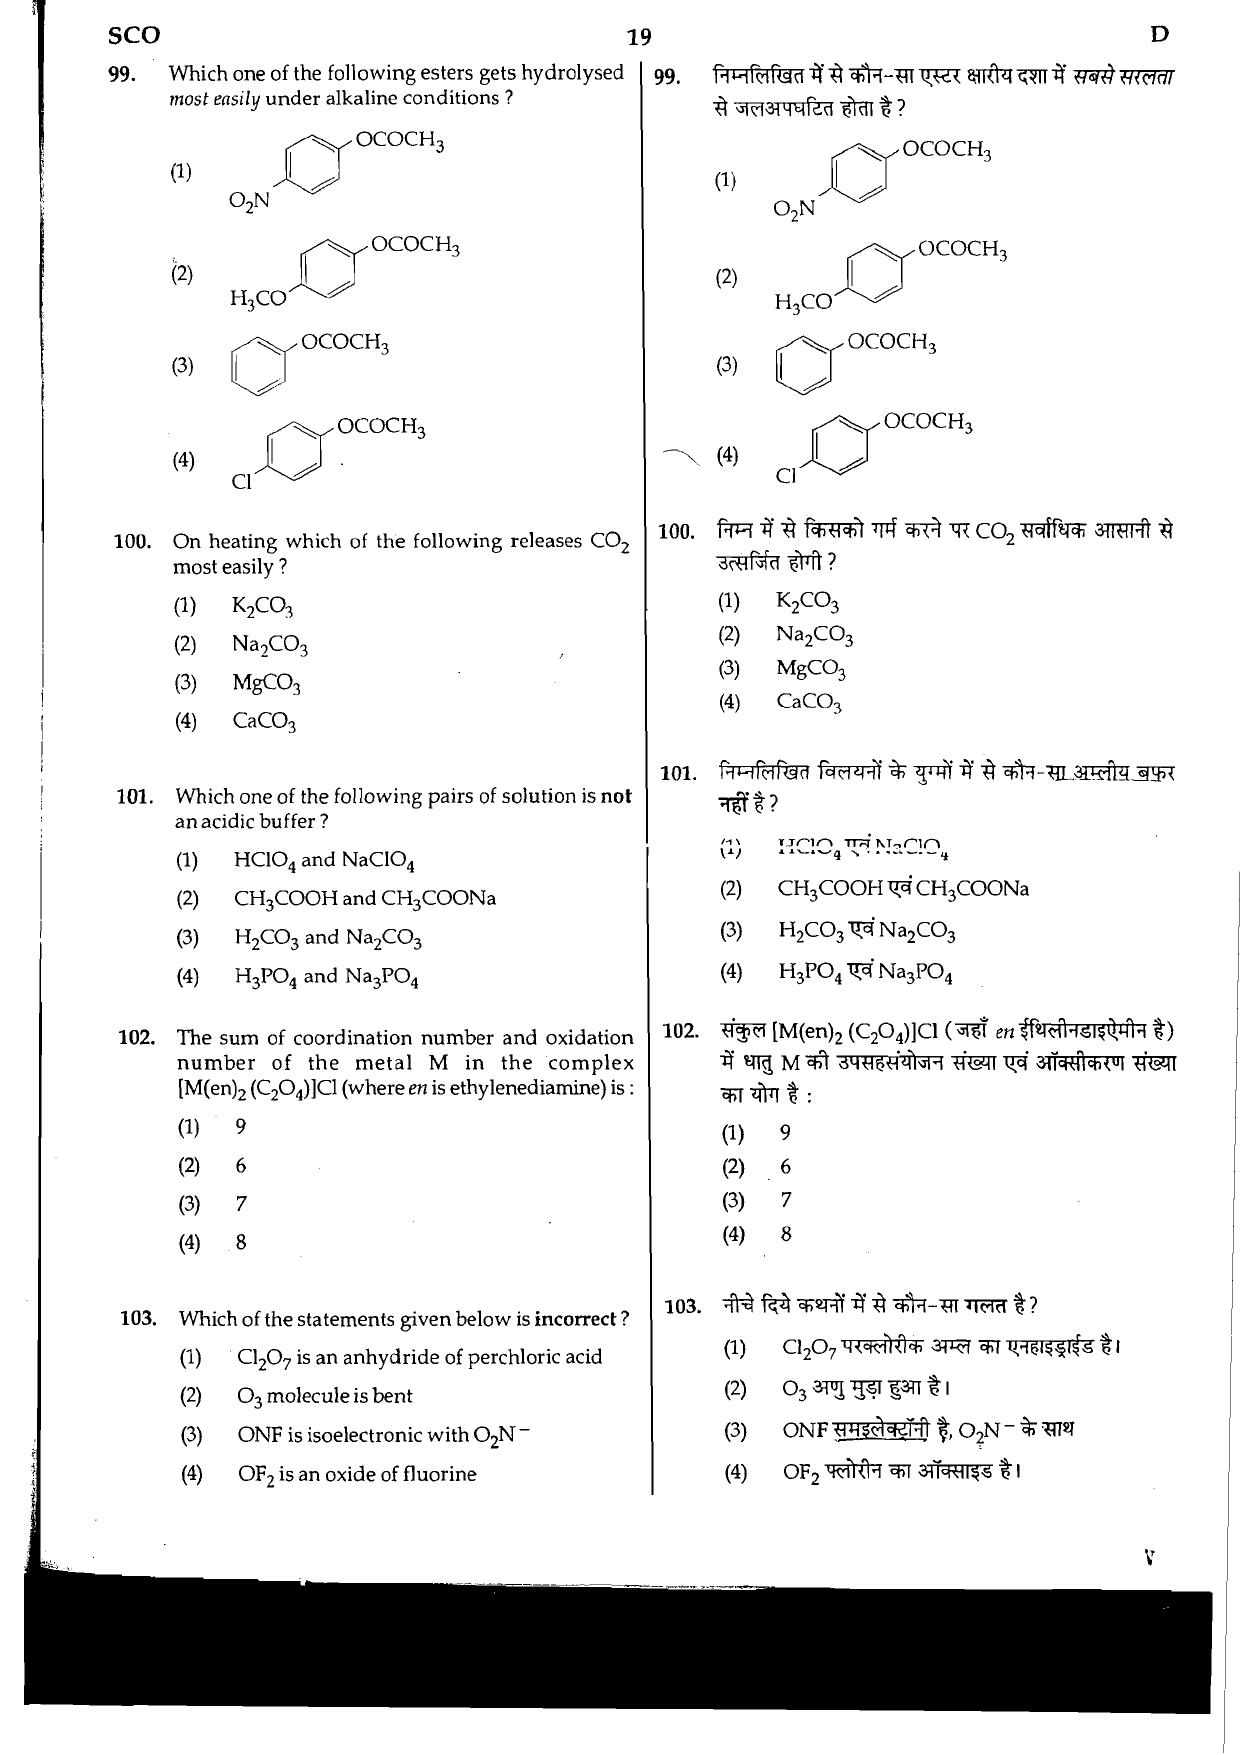 NEET Code D 2015 Question Paper - Page 19